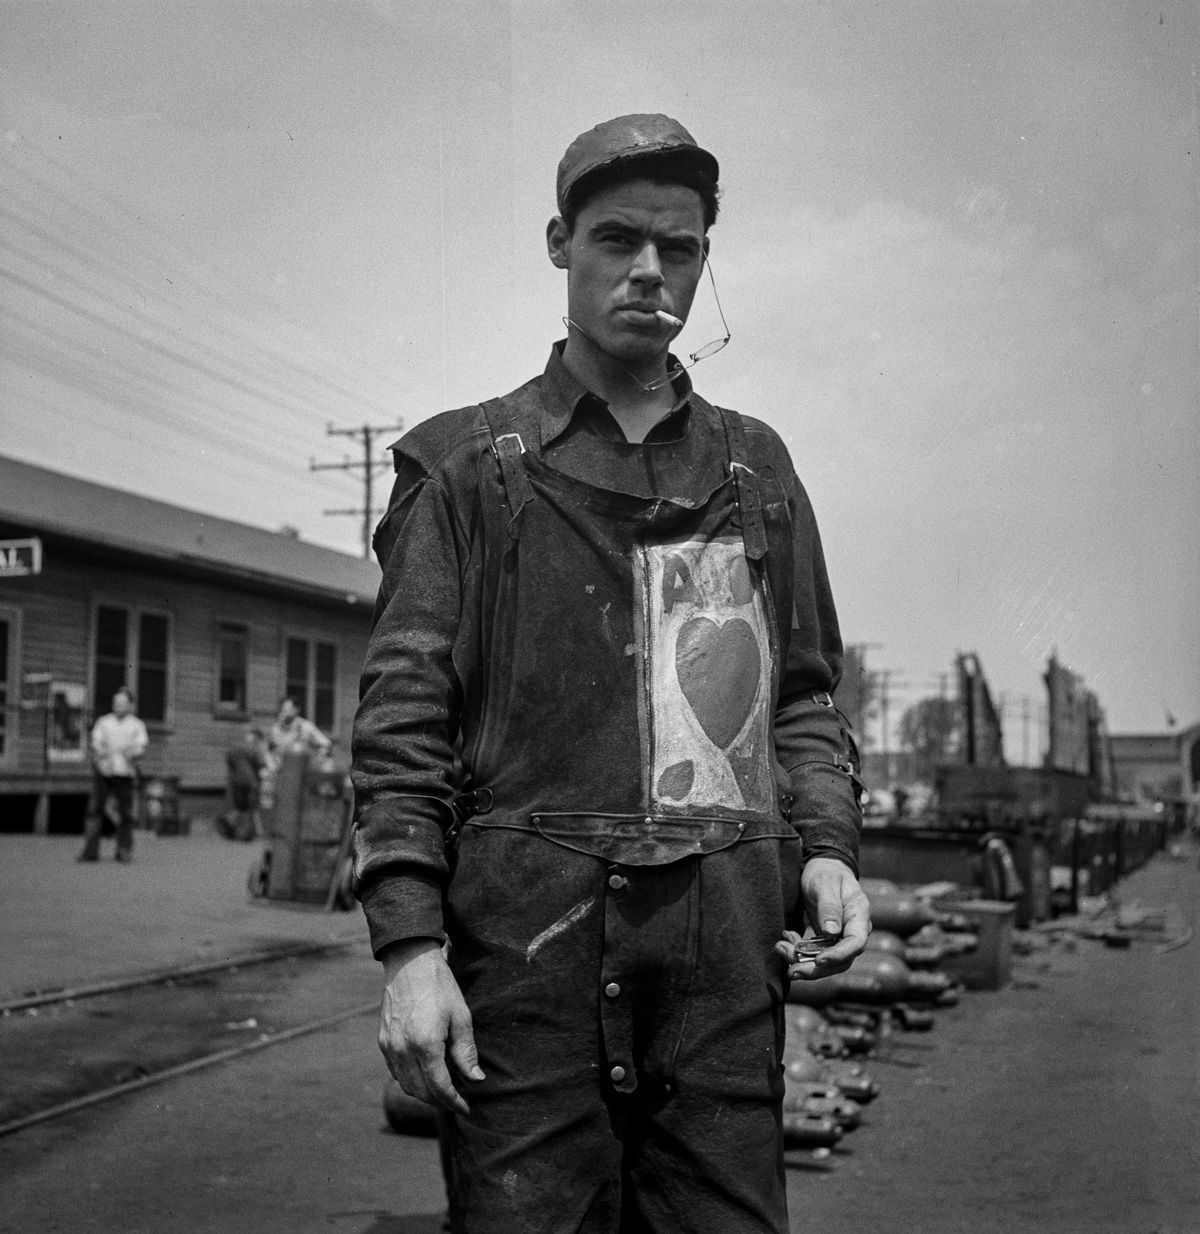 A worker with a personal monogram on his overalls